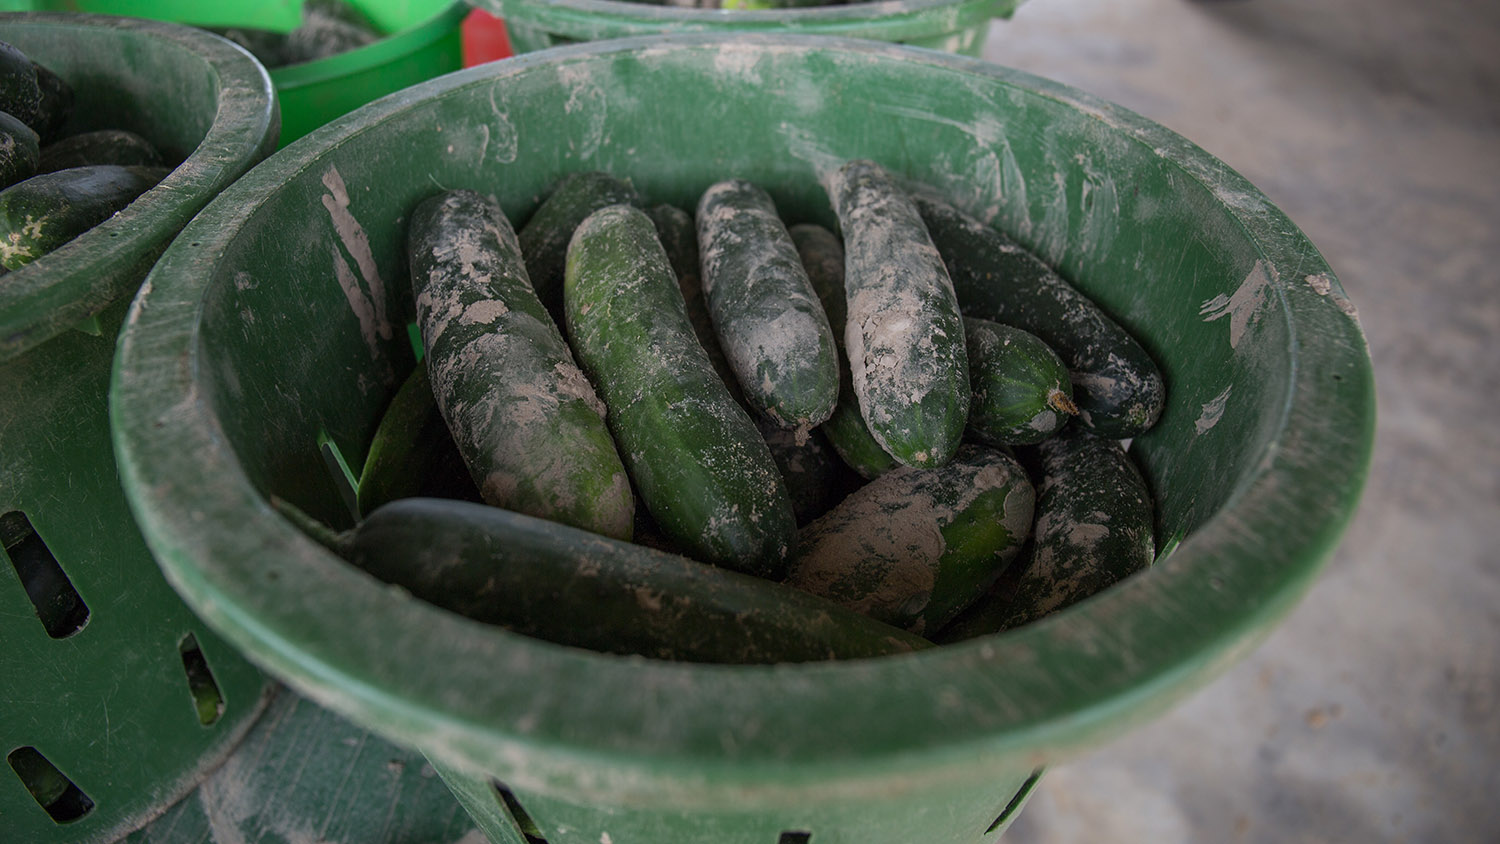 Bowl of cucumbers at Horticultural Crops, Clinton Research Station